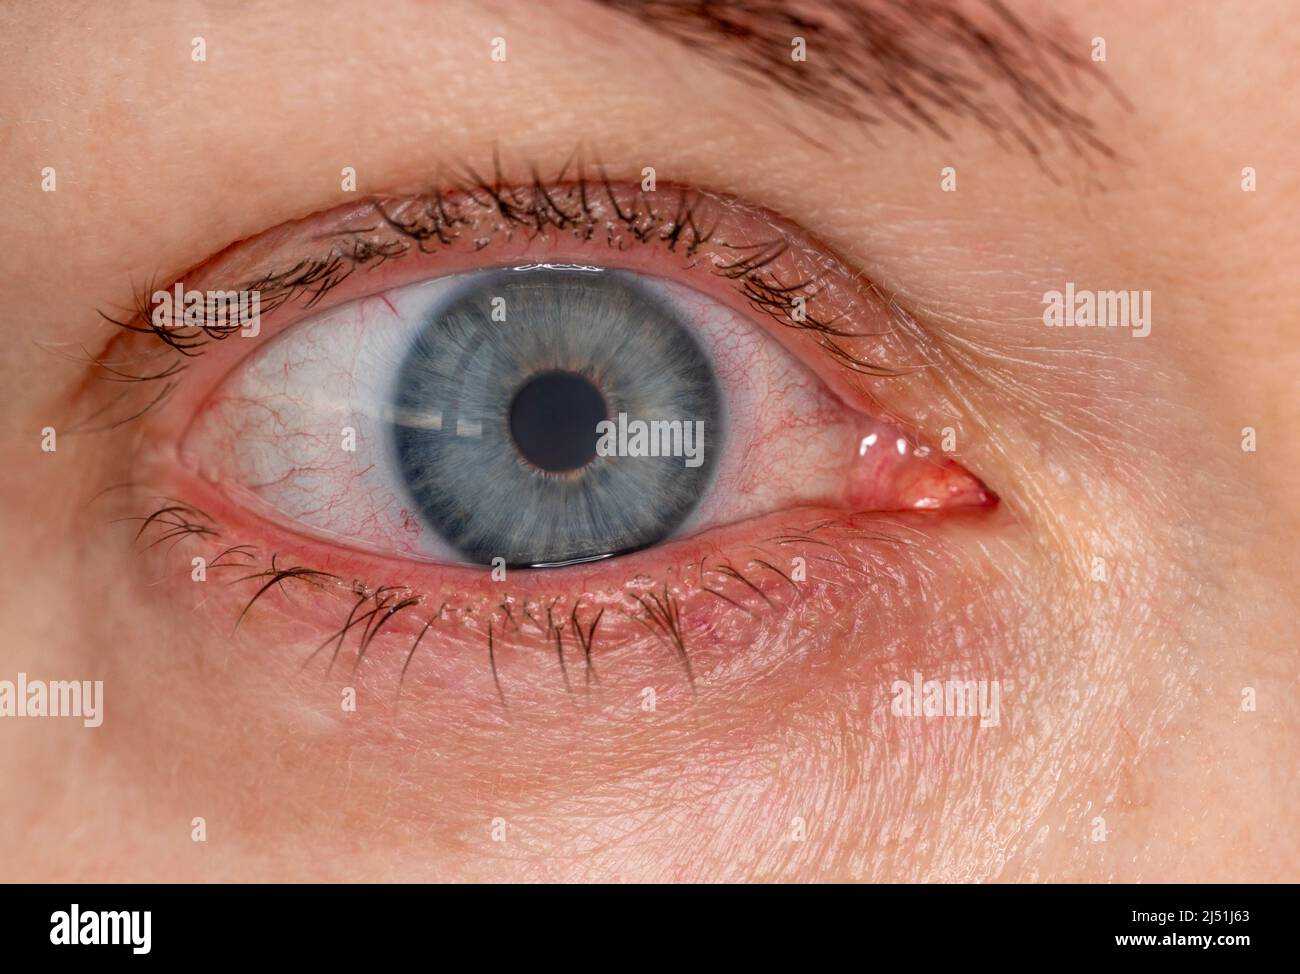 red inflamed eye with contact lens, close-up macrophoto. Dilation of the blood vessels of the eye, strain from the computer. Treating dry and sore eye Stock Photo